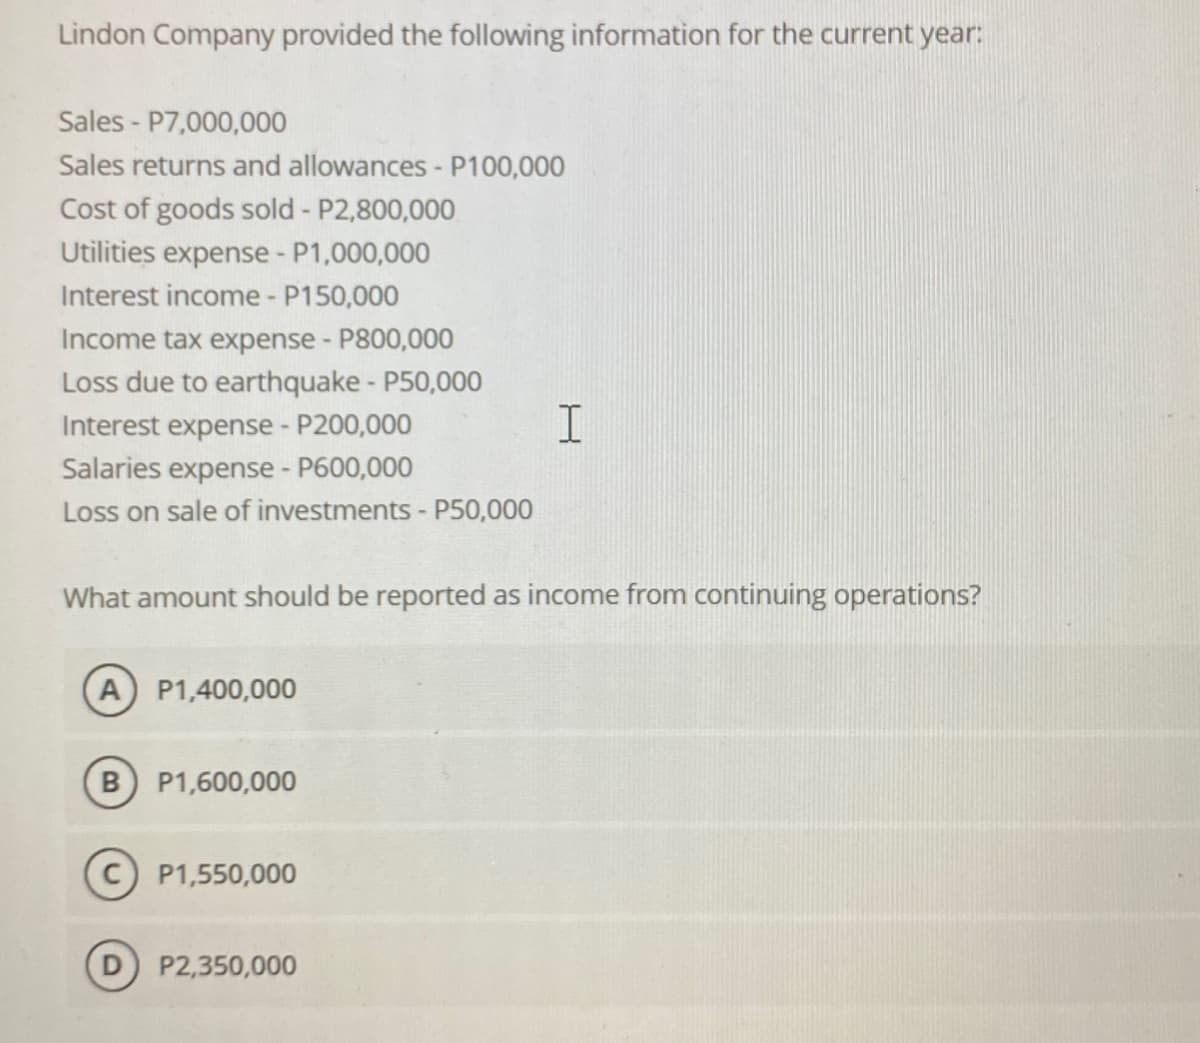 Lindon Company provided the following information for the current year:
Sales-P7,000,000
Sales returns and allowances - P100,000
Cost of goods sold - P2,800,000
Utilities expense - P1,000,000
Interest income - P150,000
Income tax expense - P800,000
Loss due to earthquake - P50,000
Interest expense - P200,000
Salaries expense - P600,000
Loss on sale of investments - P50,000
What amount should be reported as income from continuing operations?
A) P1,400,000
B) P1,600,000
P1,550,000
I
P2,350,000